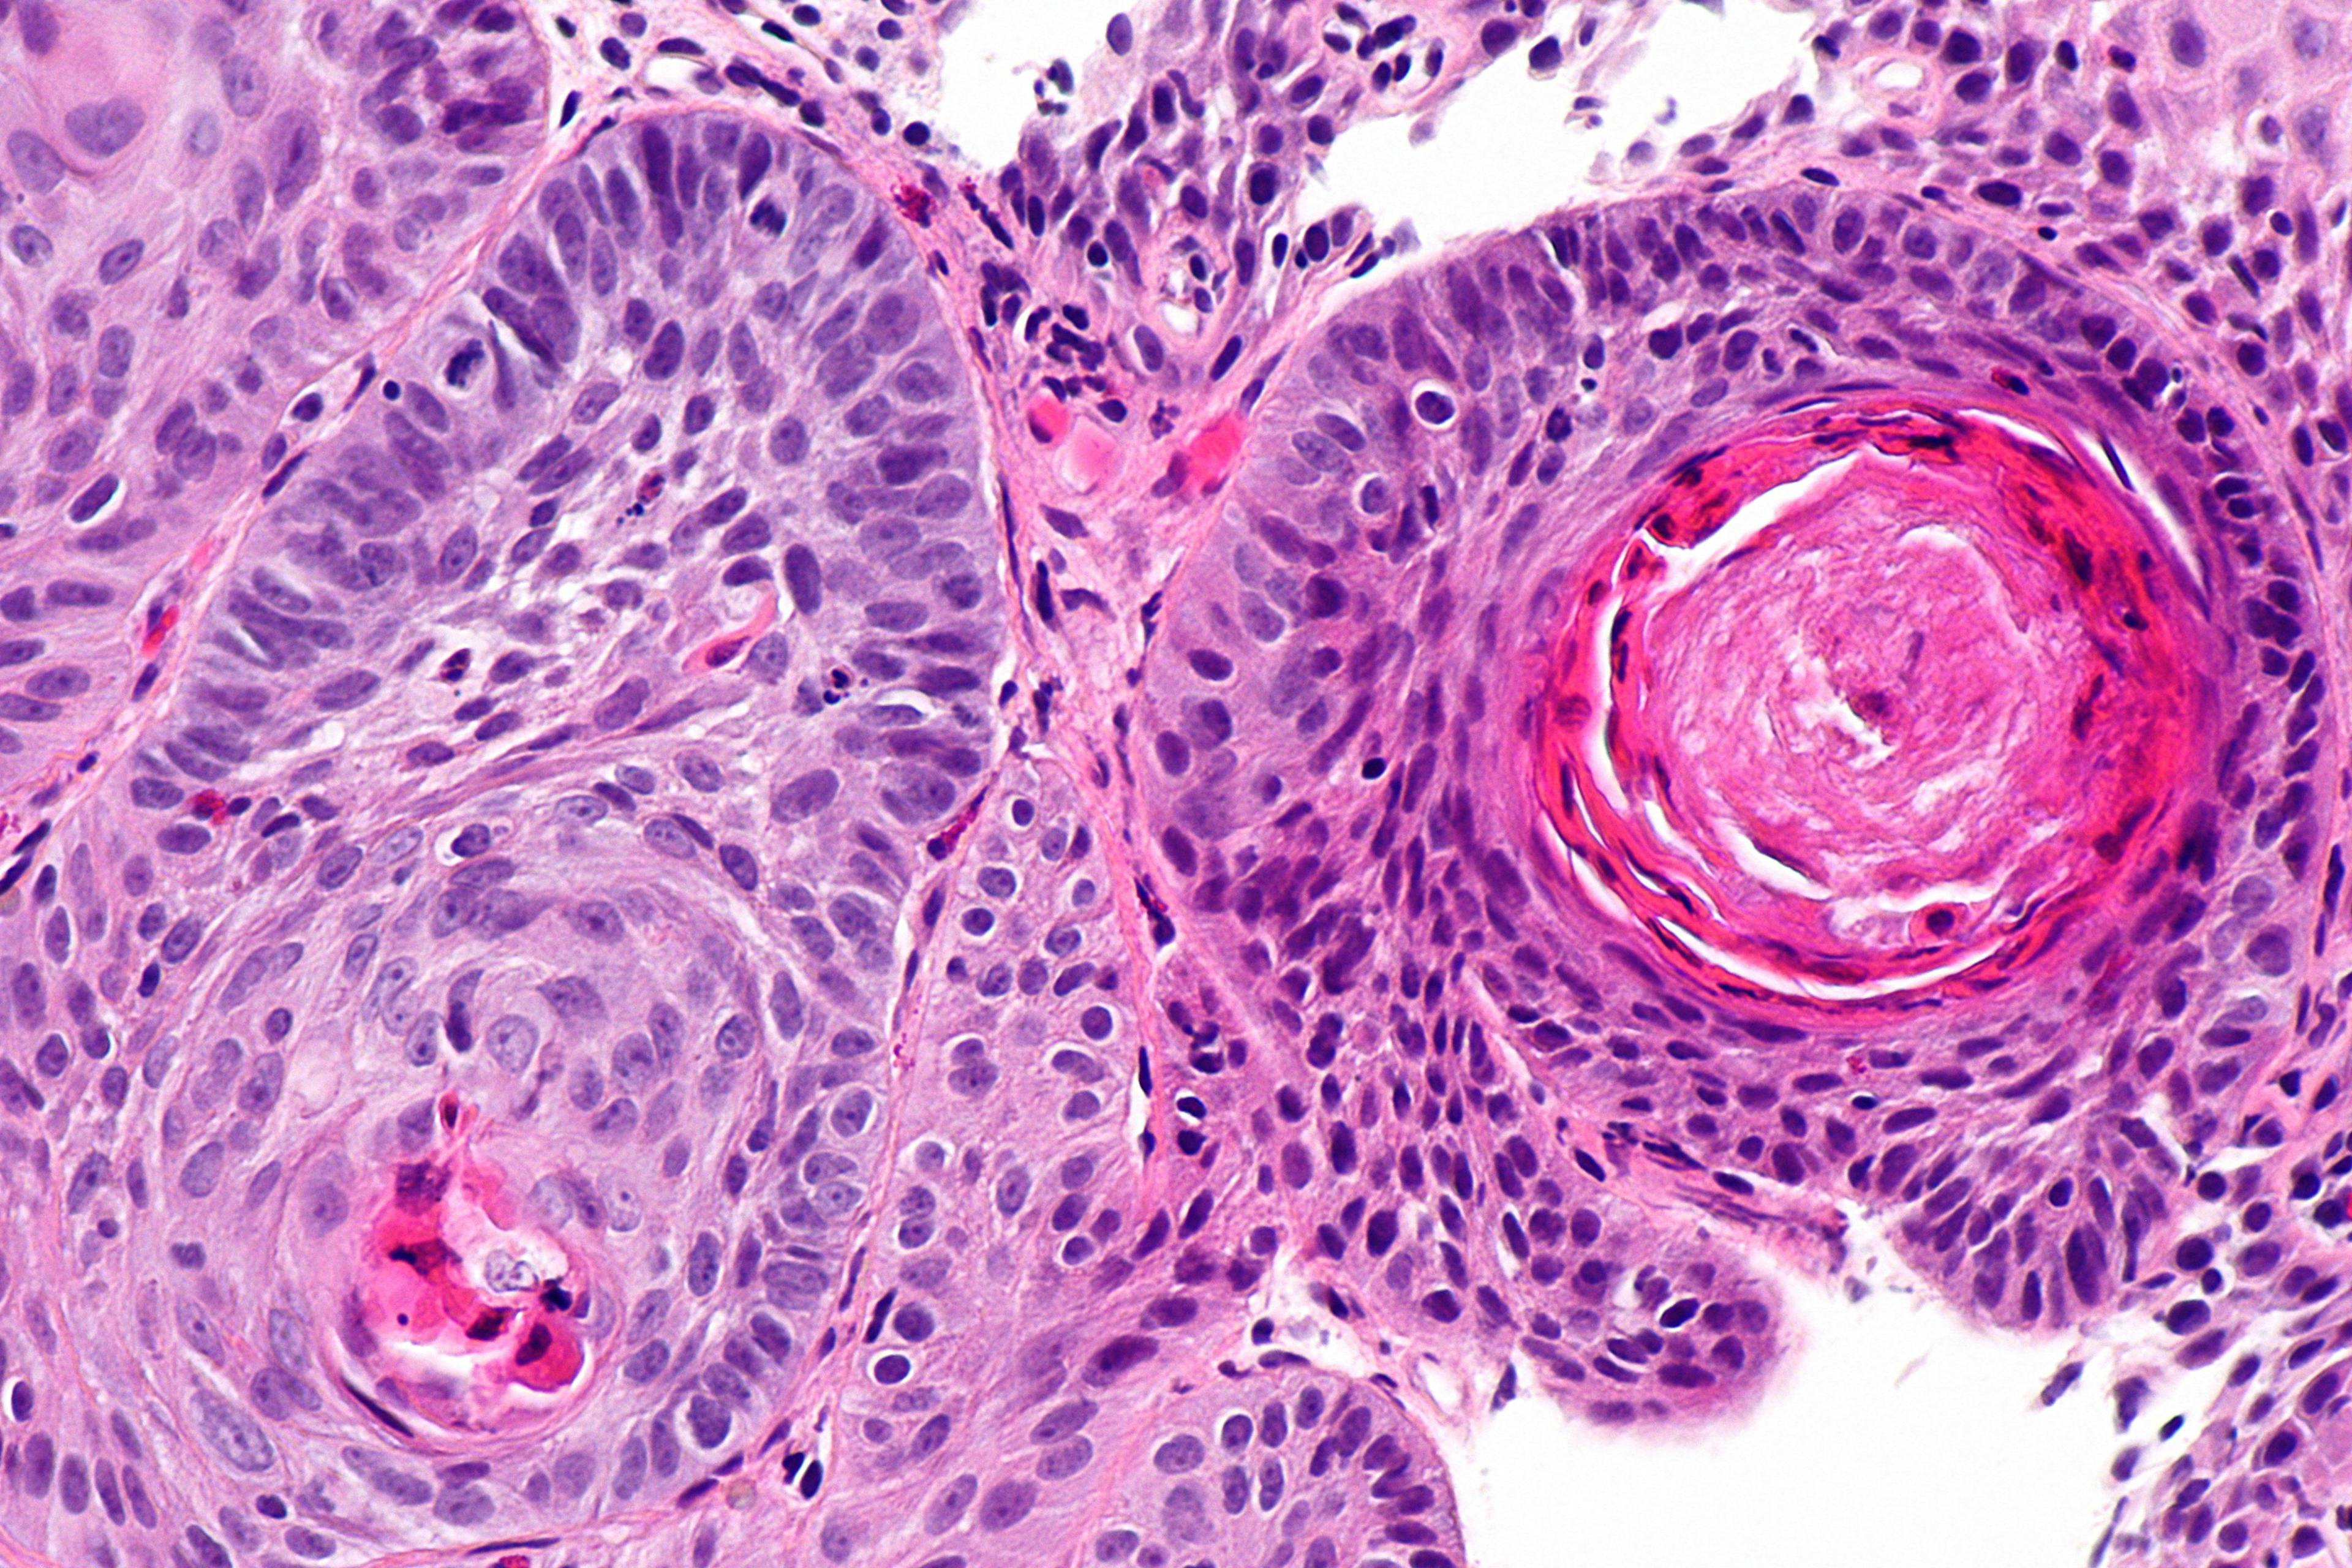 Esophageal squamous cell carcinoma